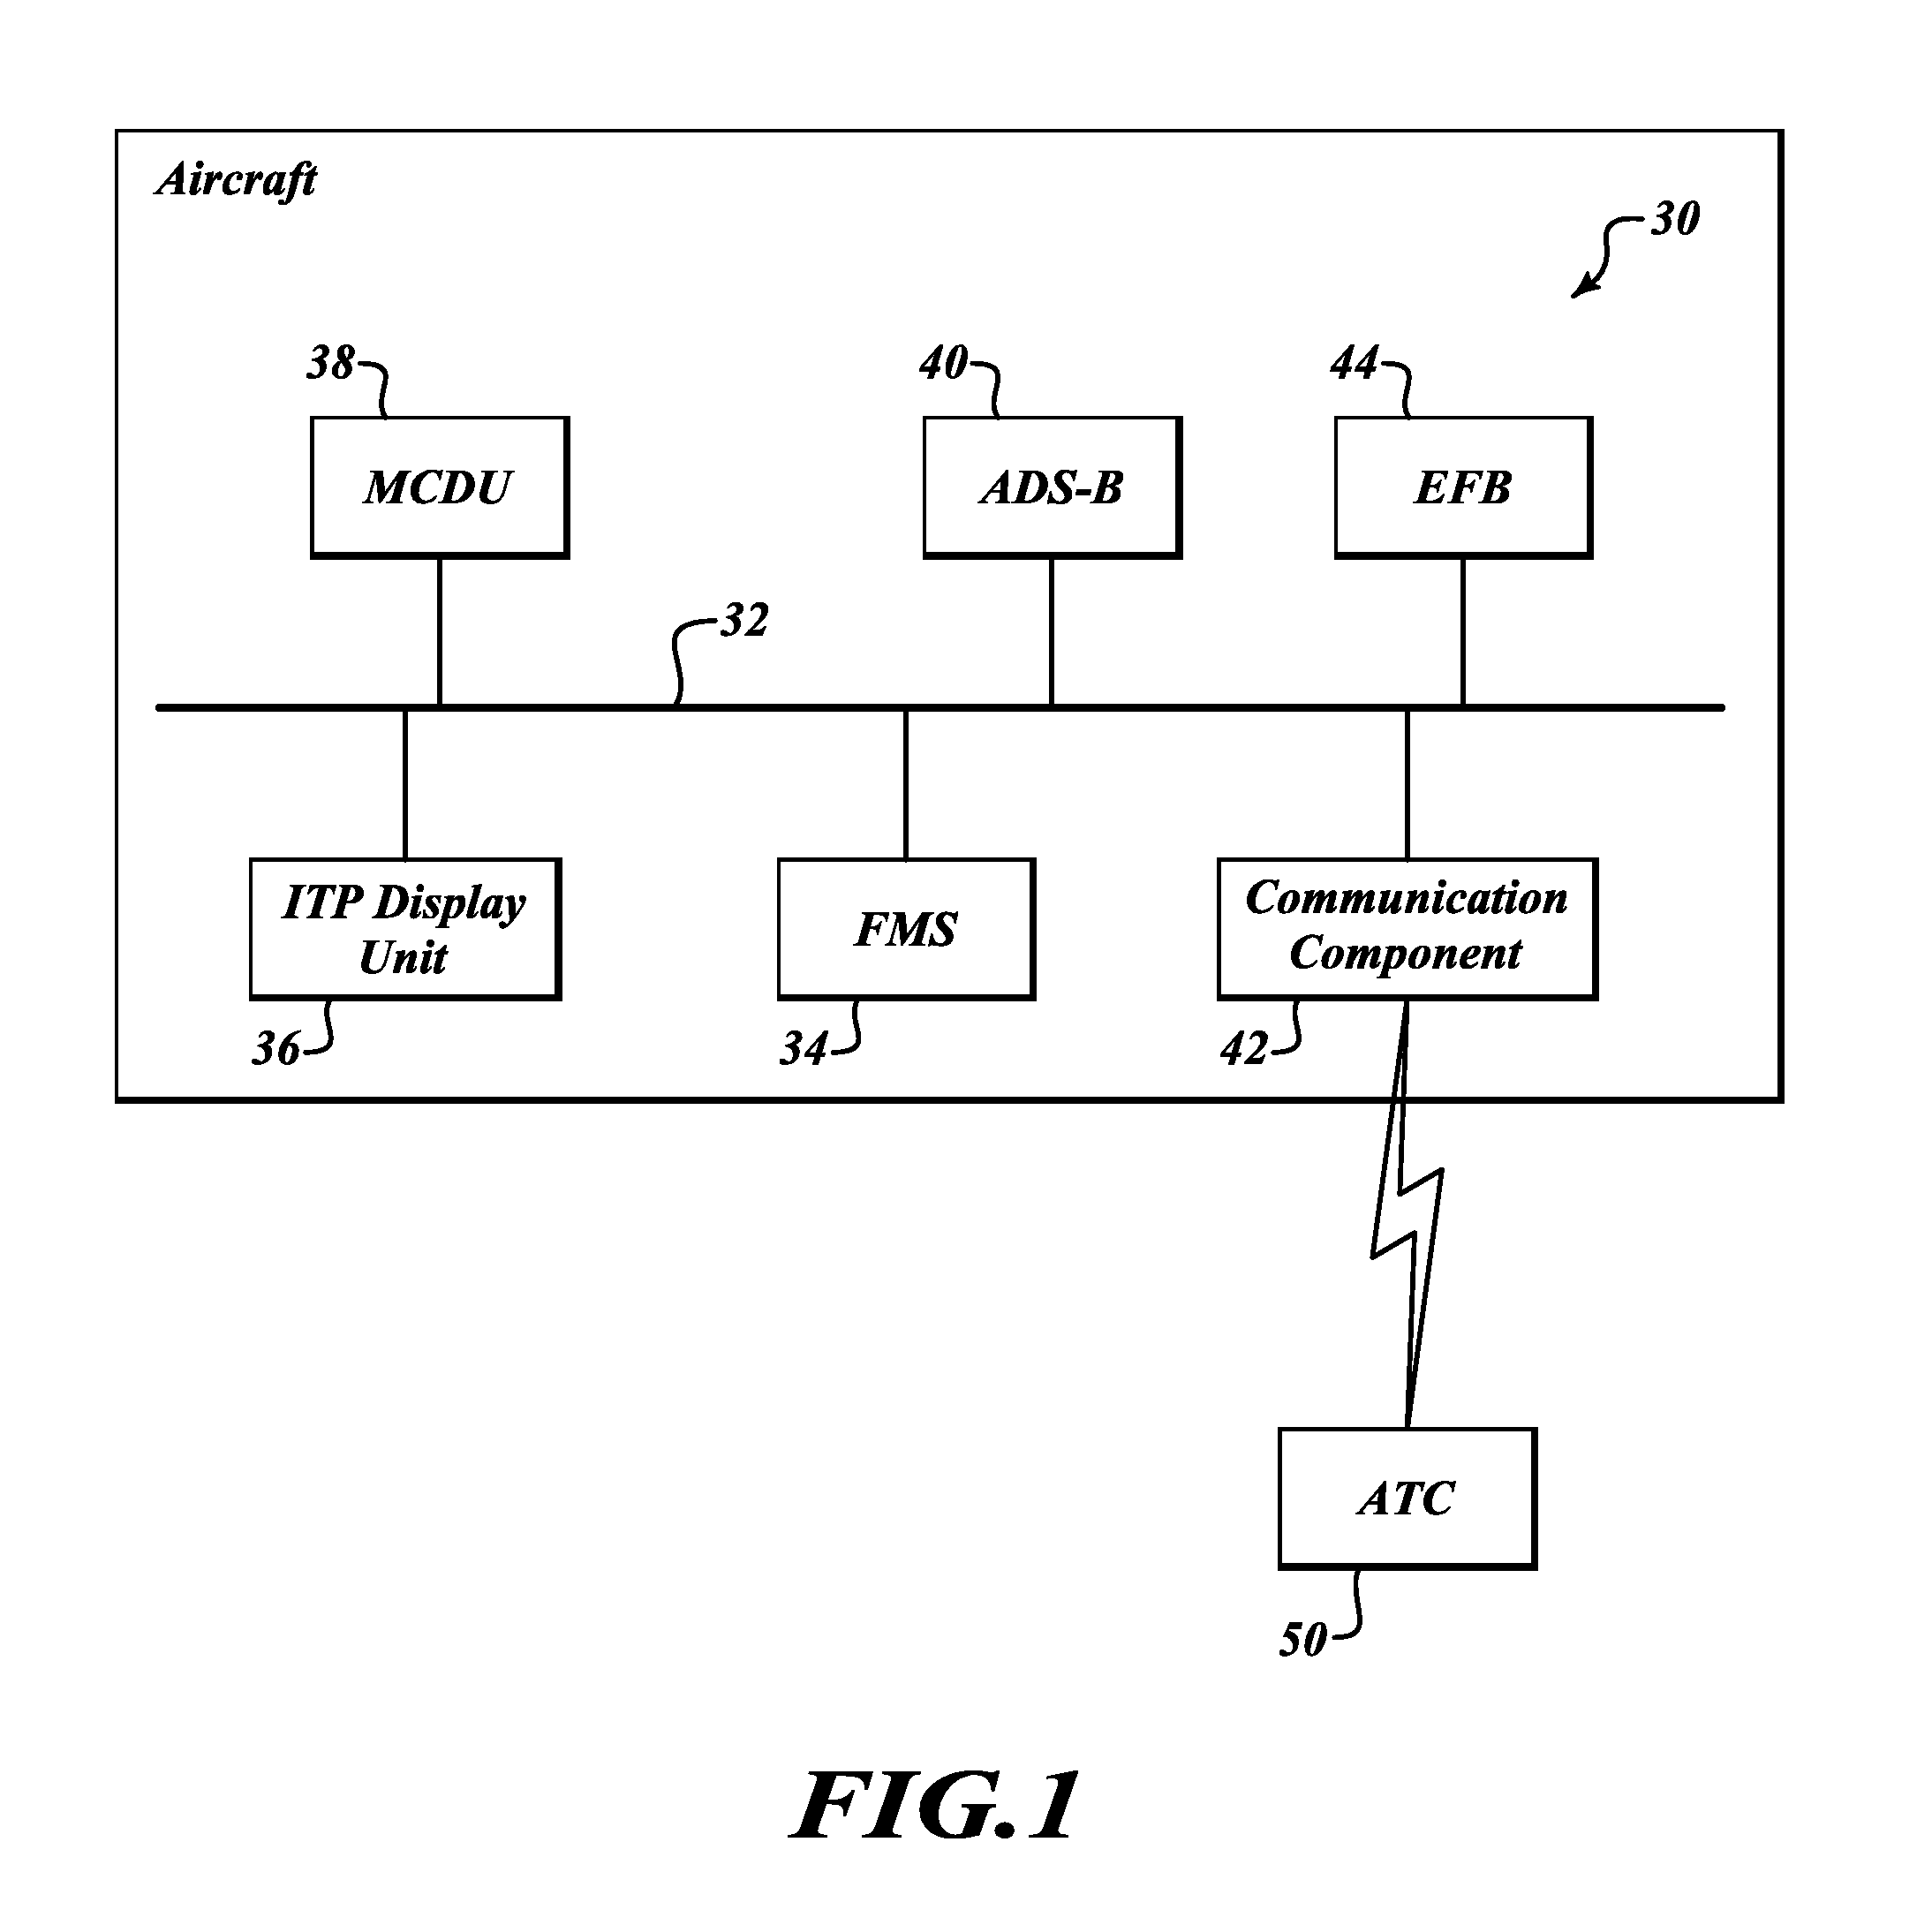 Systems and methods for improving an in-trail procedures request